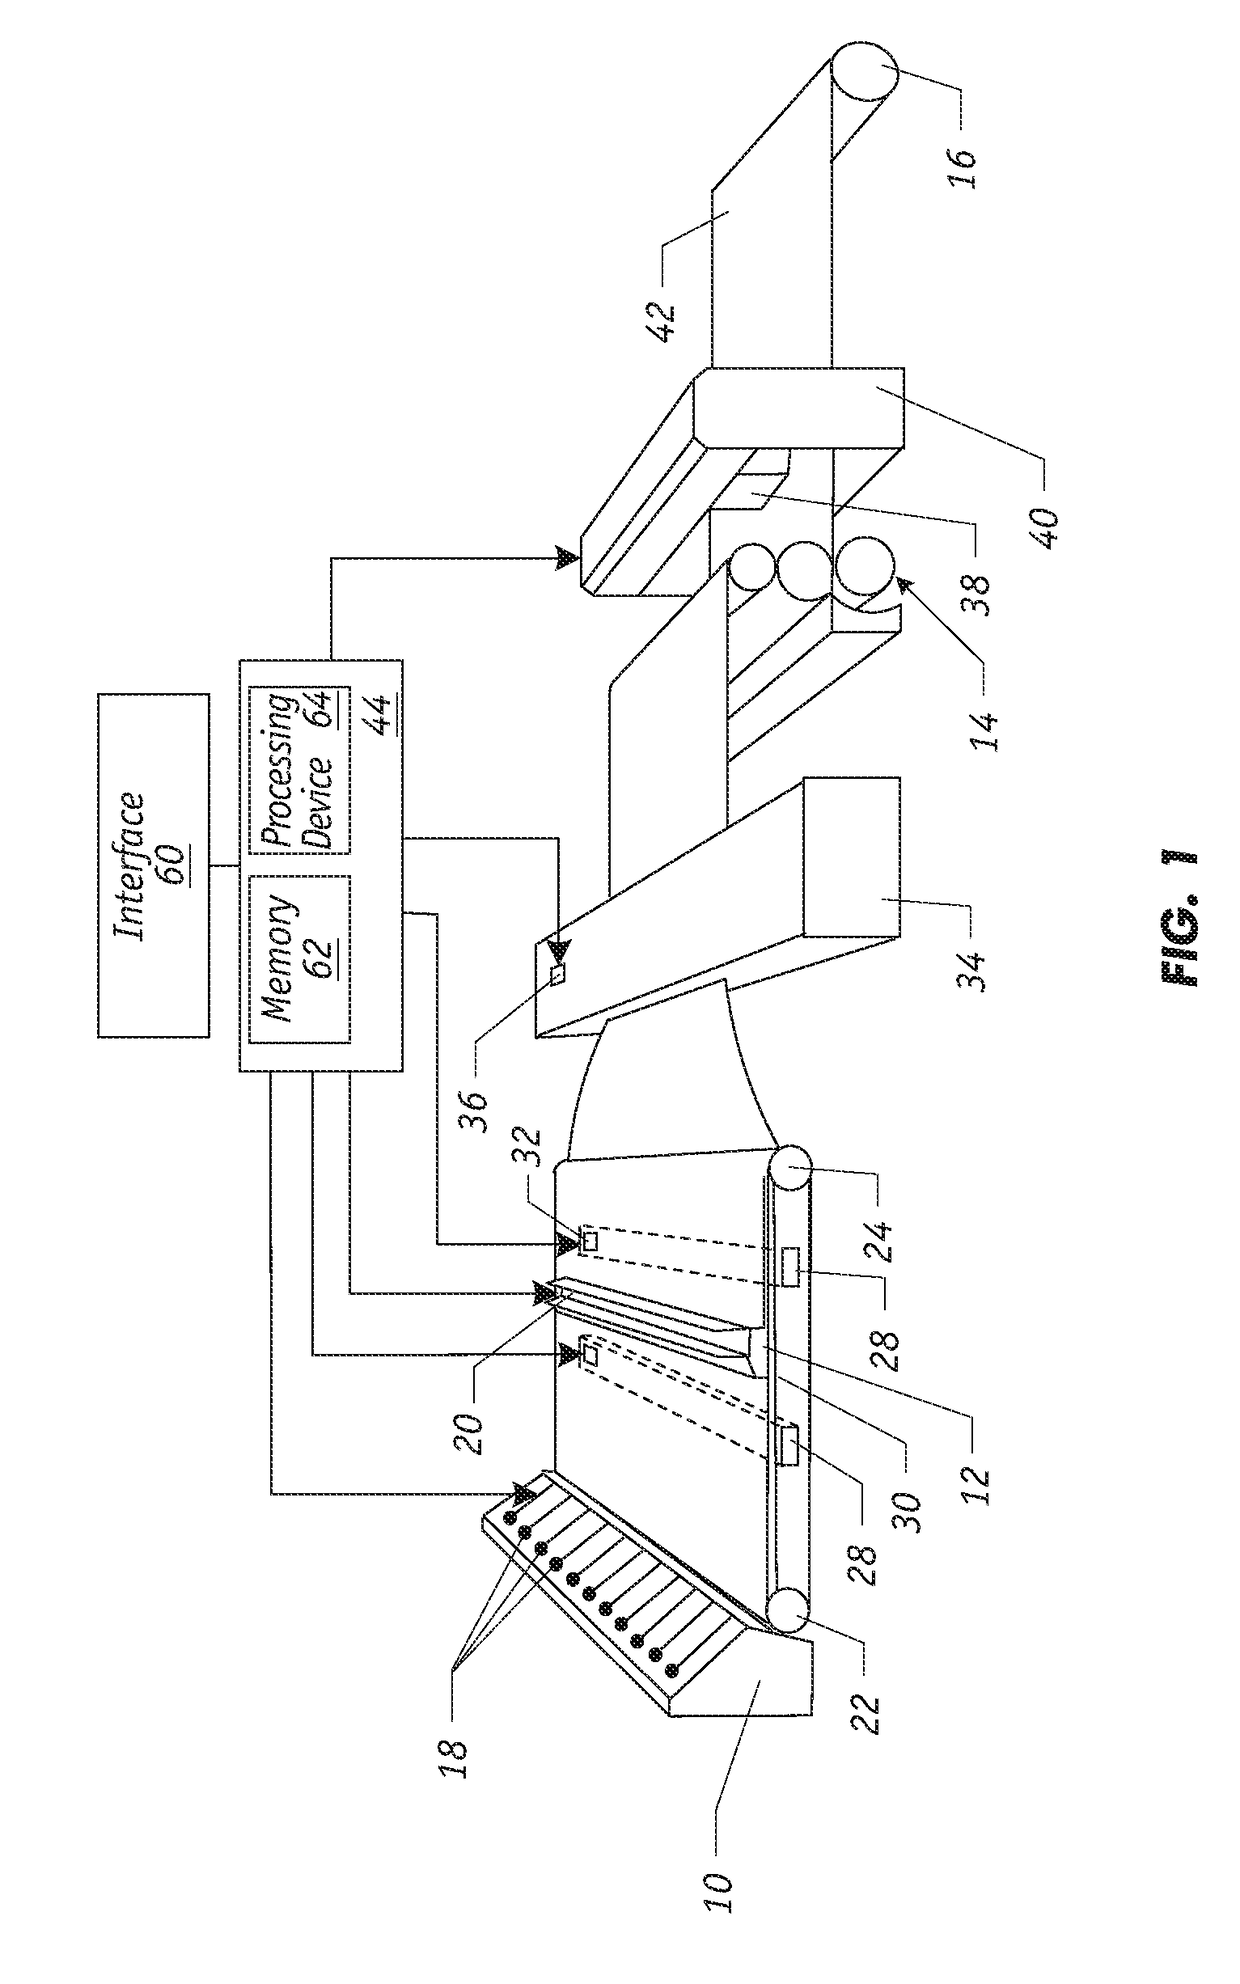 Method of Designing Model Predictive Control for Cross Directional Flat Sheet Manufacturing Processes to Guarantee Temporal Robust Stability and Performance